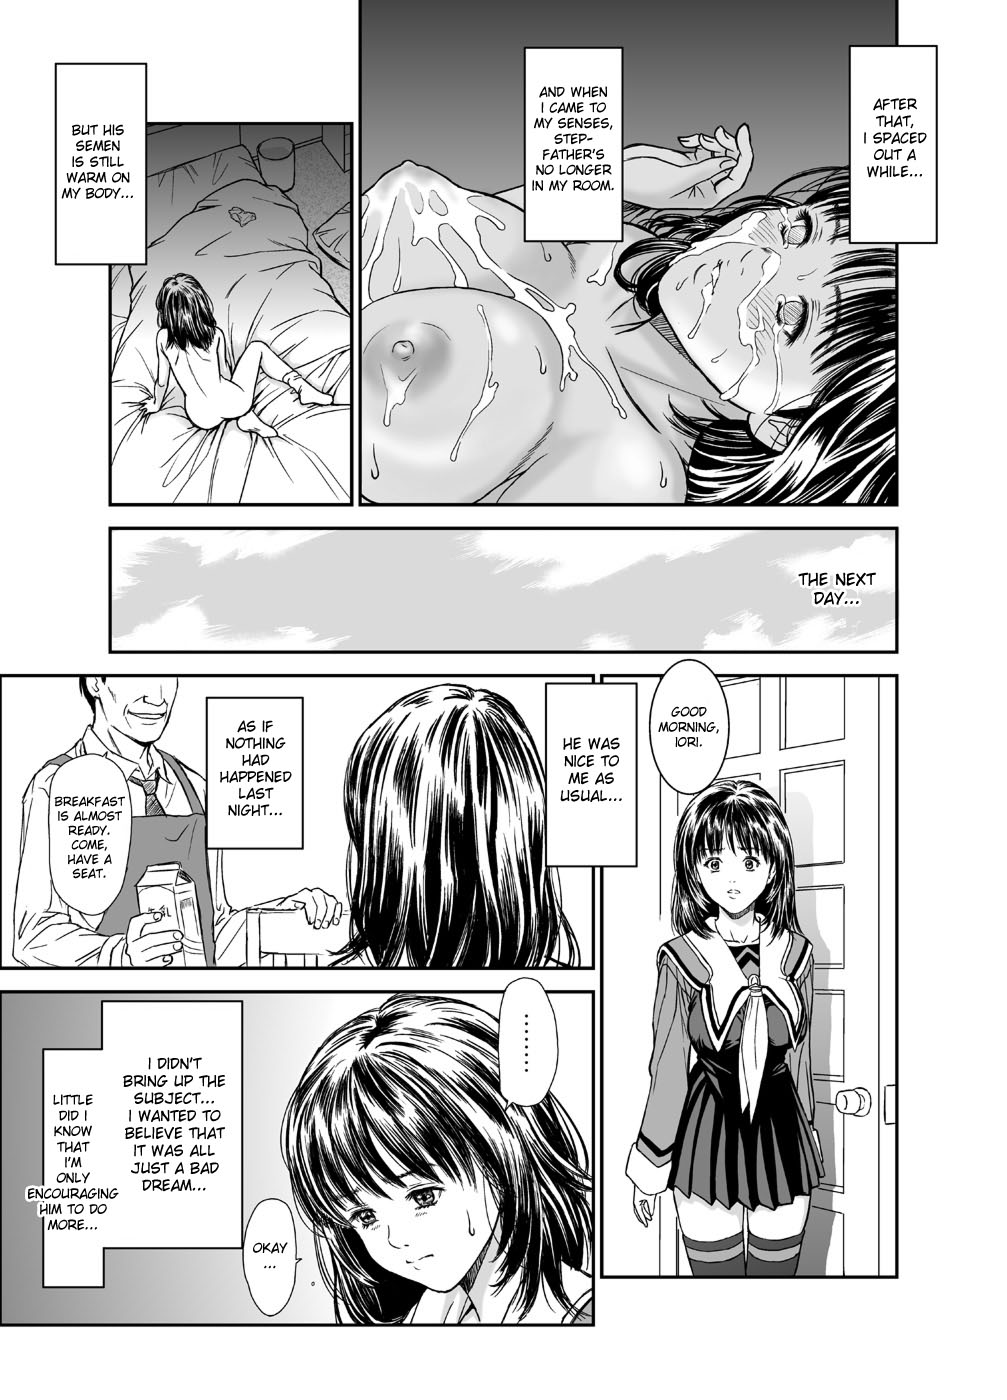 [Redlight] Iori - The Dark Side Of That Girl (Is) [English] page 7 full